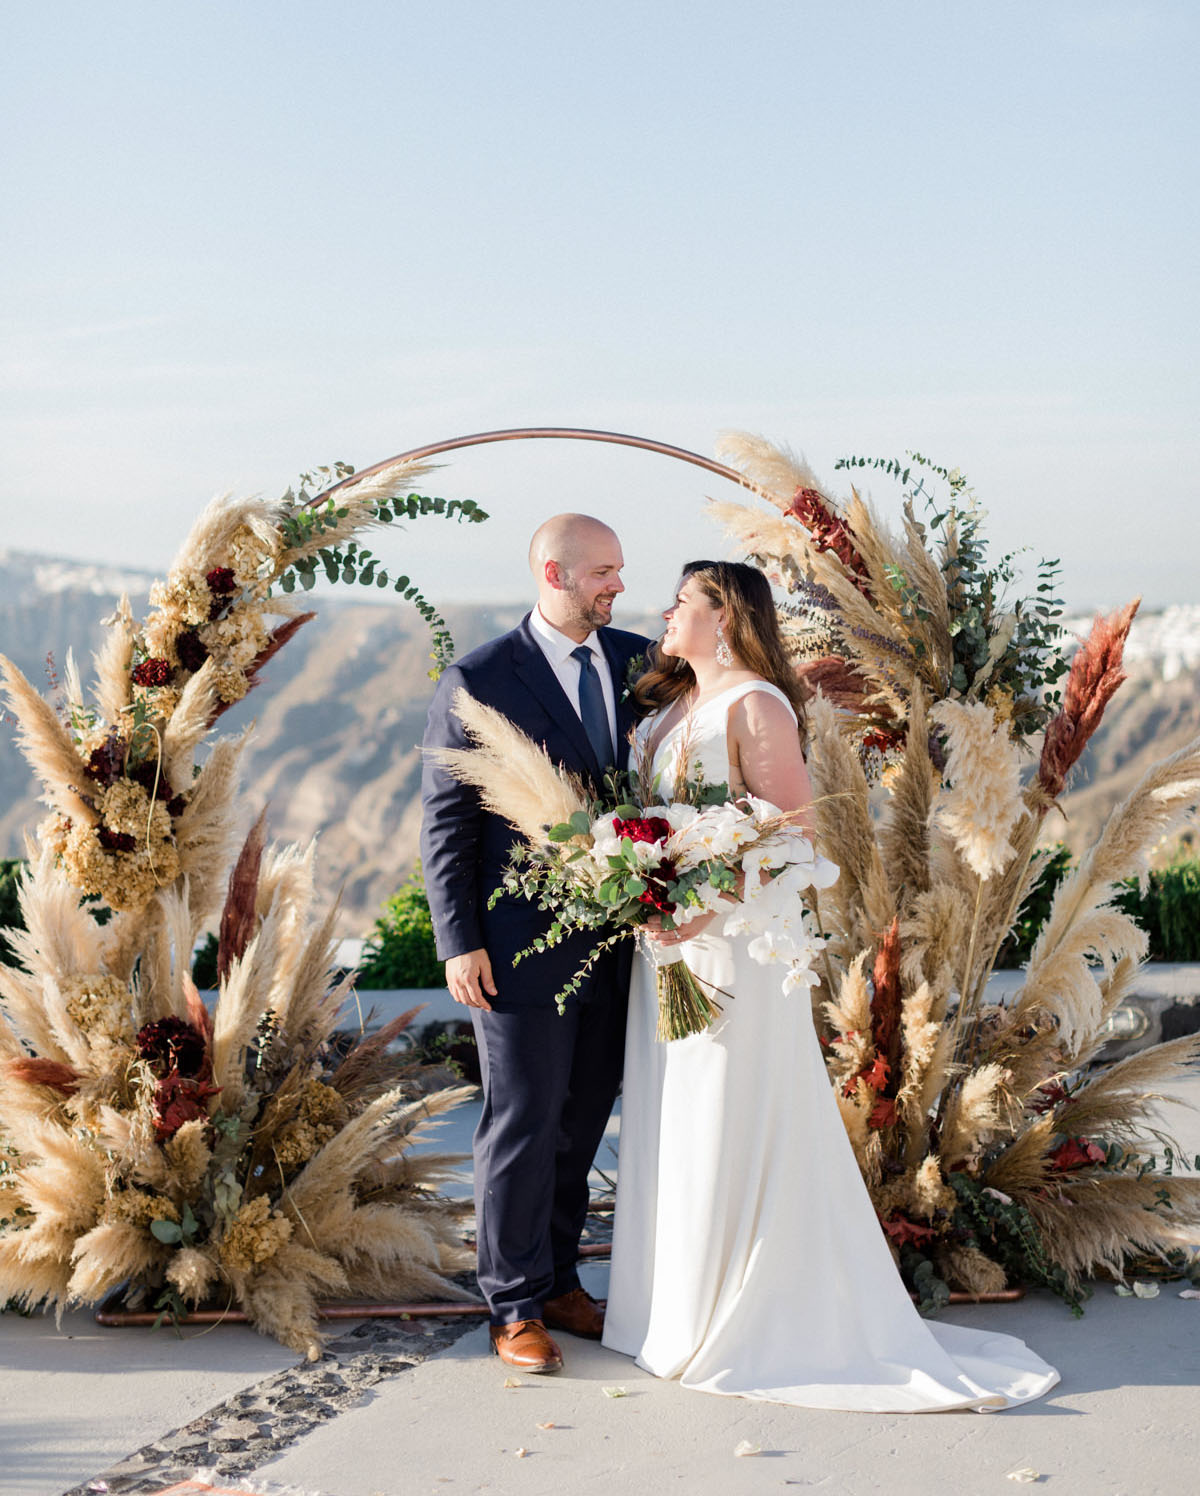 This beautiful Santorini wedding was filled with pampas grass, greenery and elegance